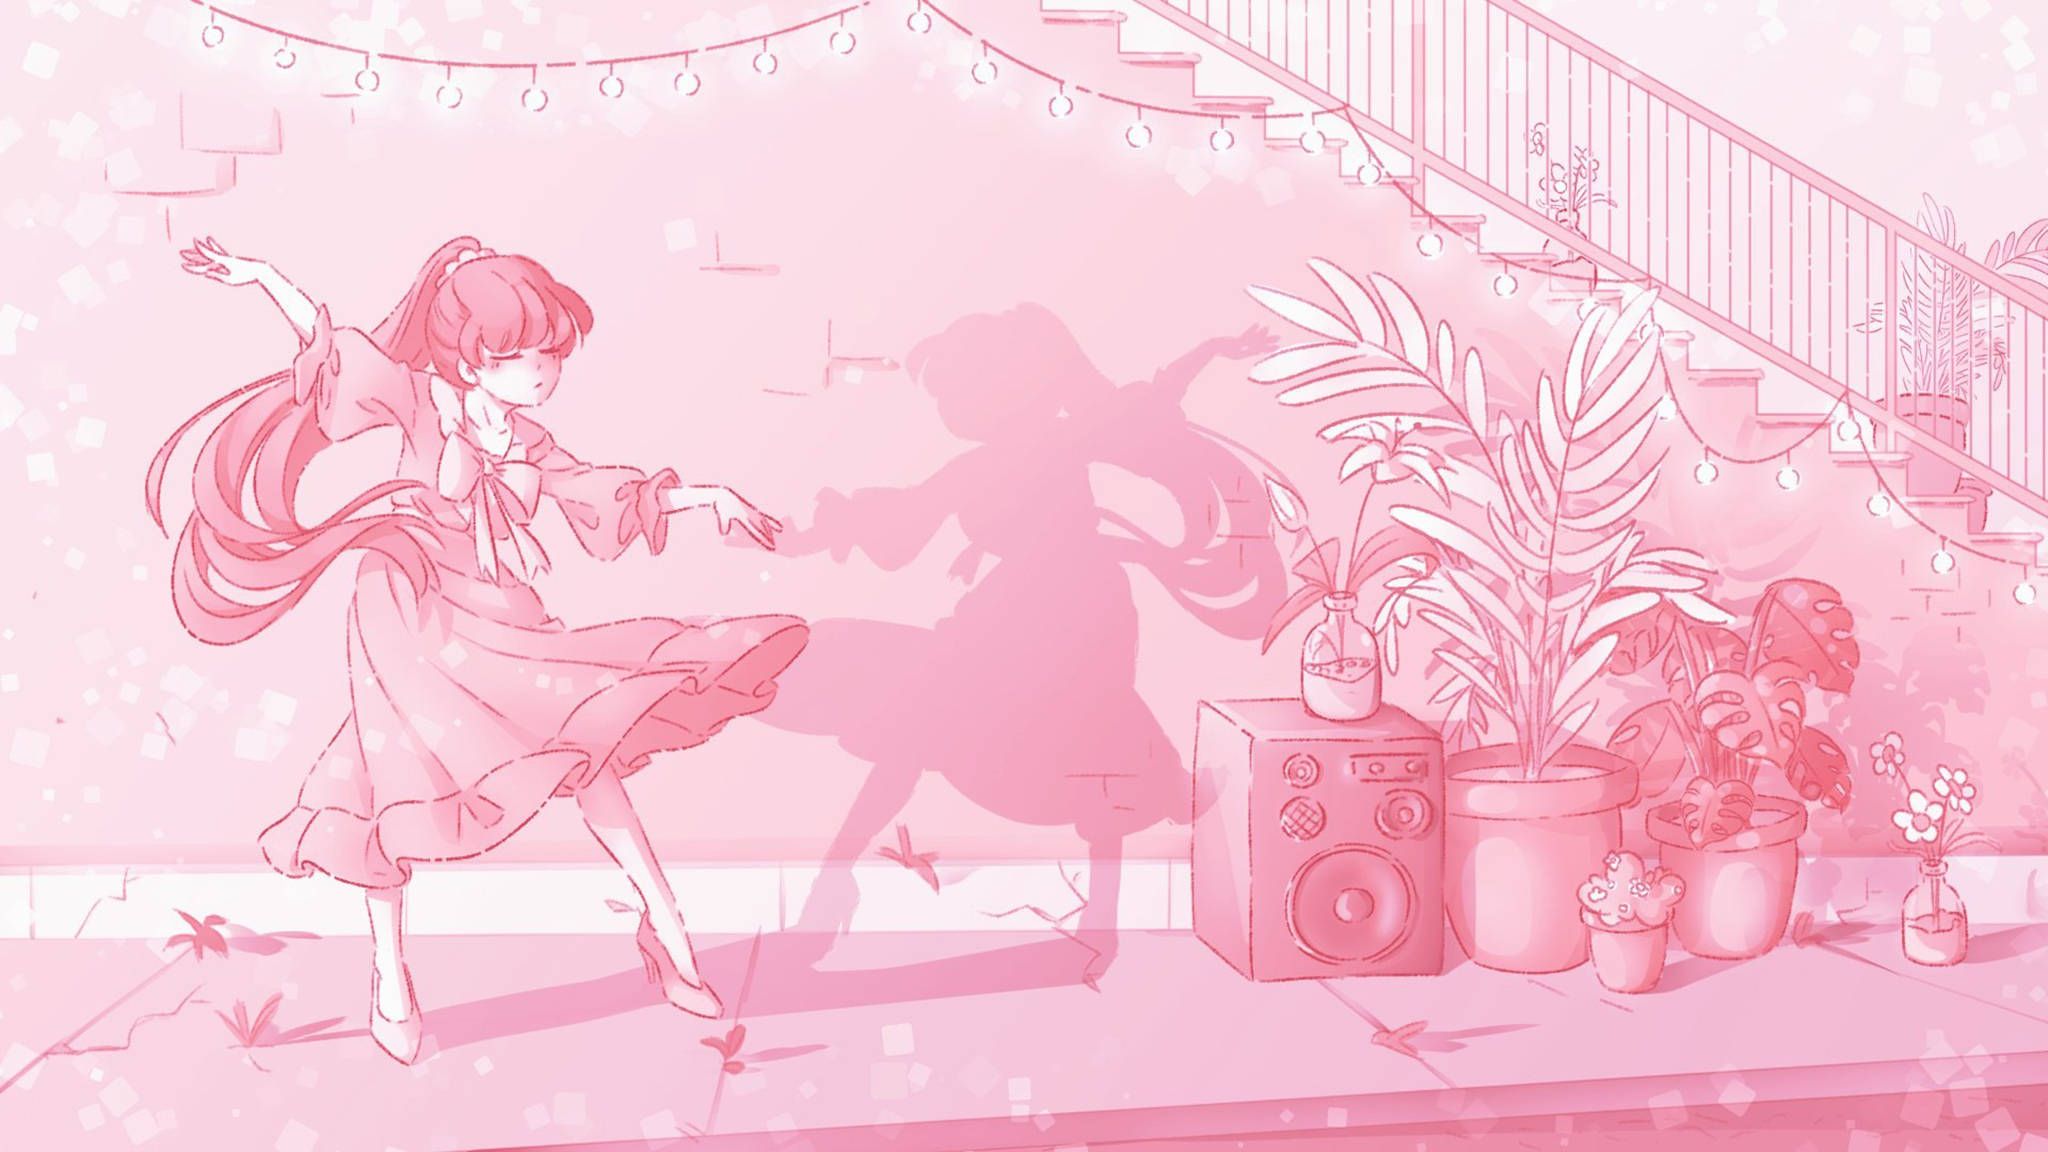 A girl dances in a pink room with houseplants and a radio. - Pink anime